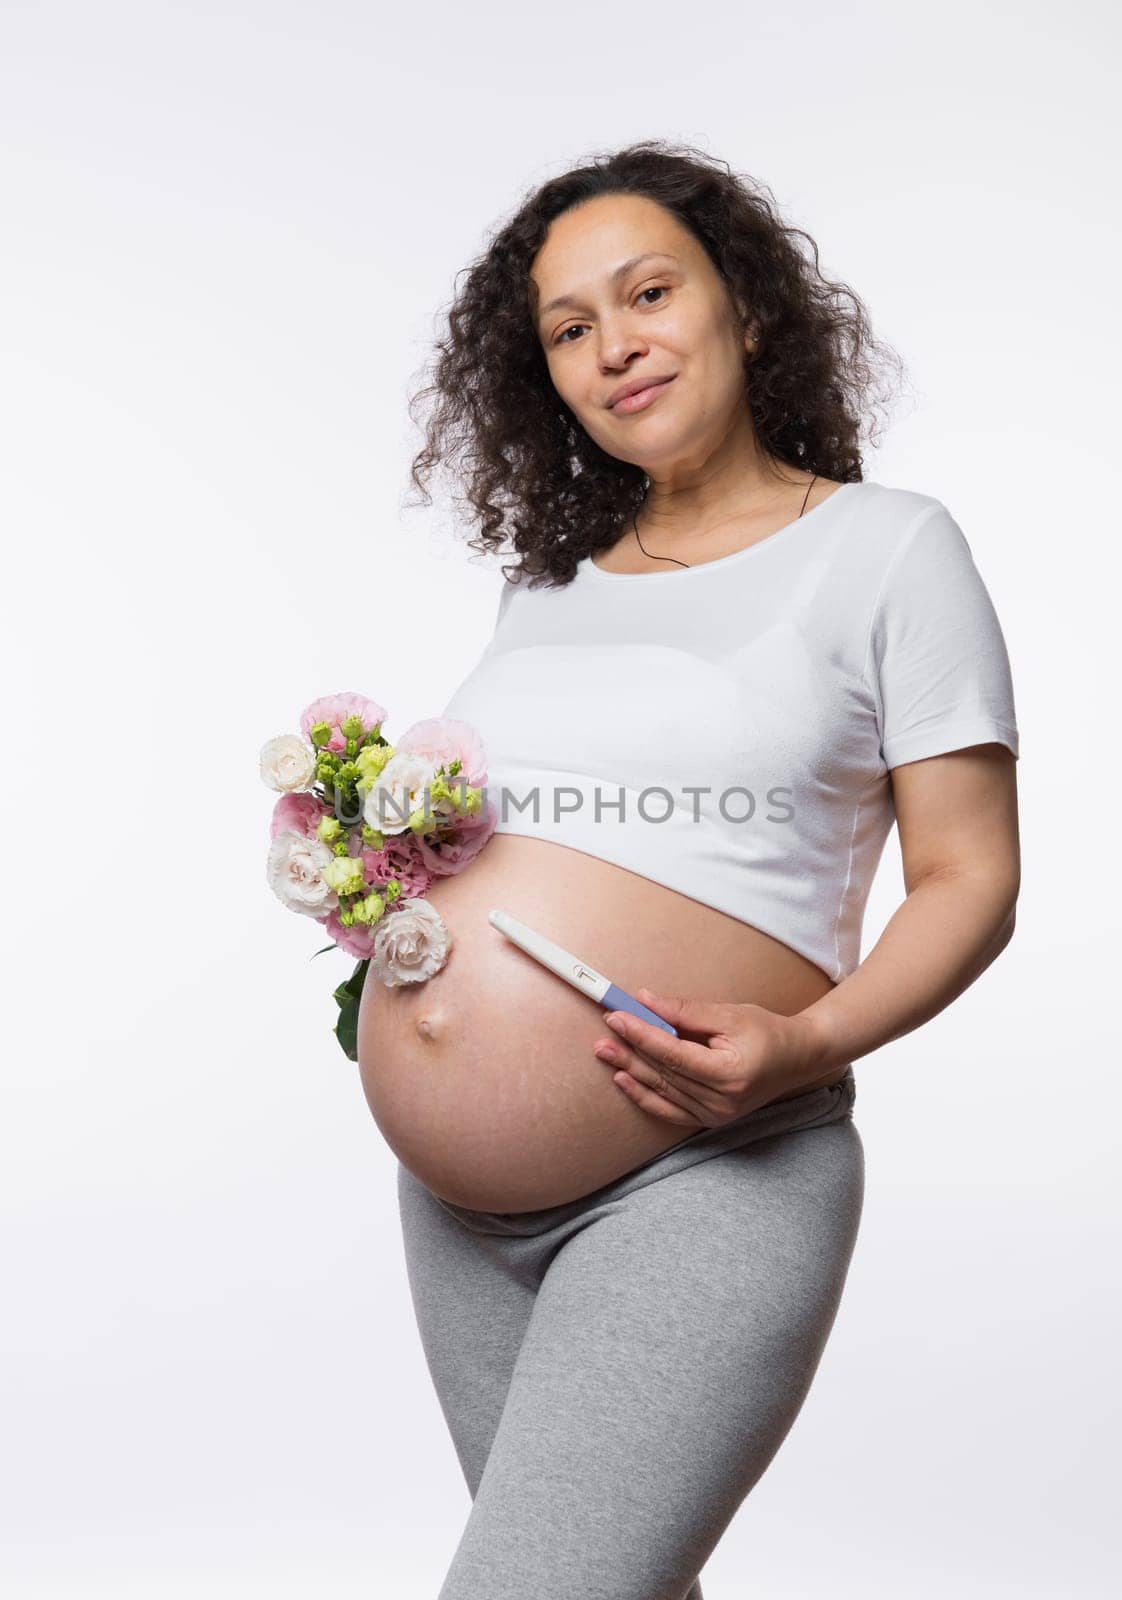 Expecting a baby. Childbearing, childbirth and maternity concept. Beautiful pregnant woman holding pregnancy test and bouquet of flowers, smiling looking at camera, isolated on white studio background